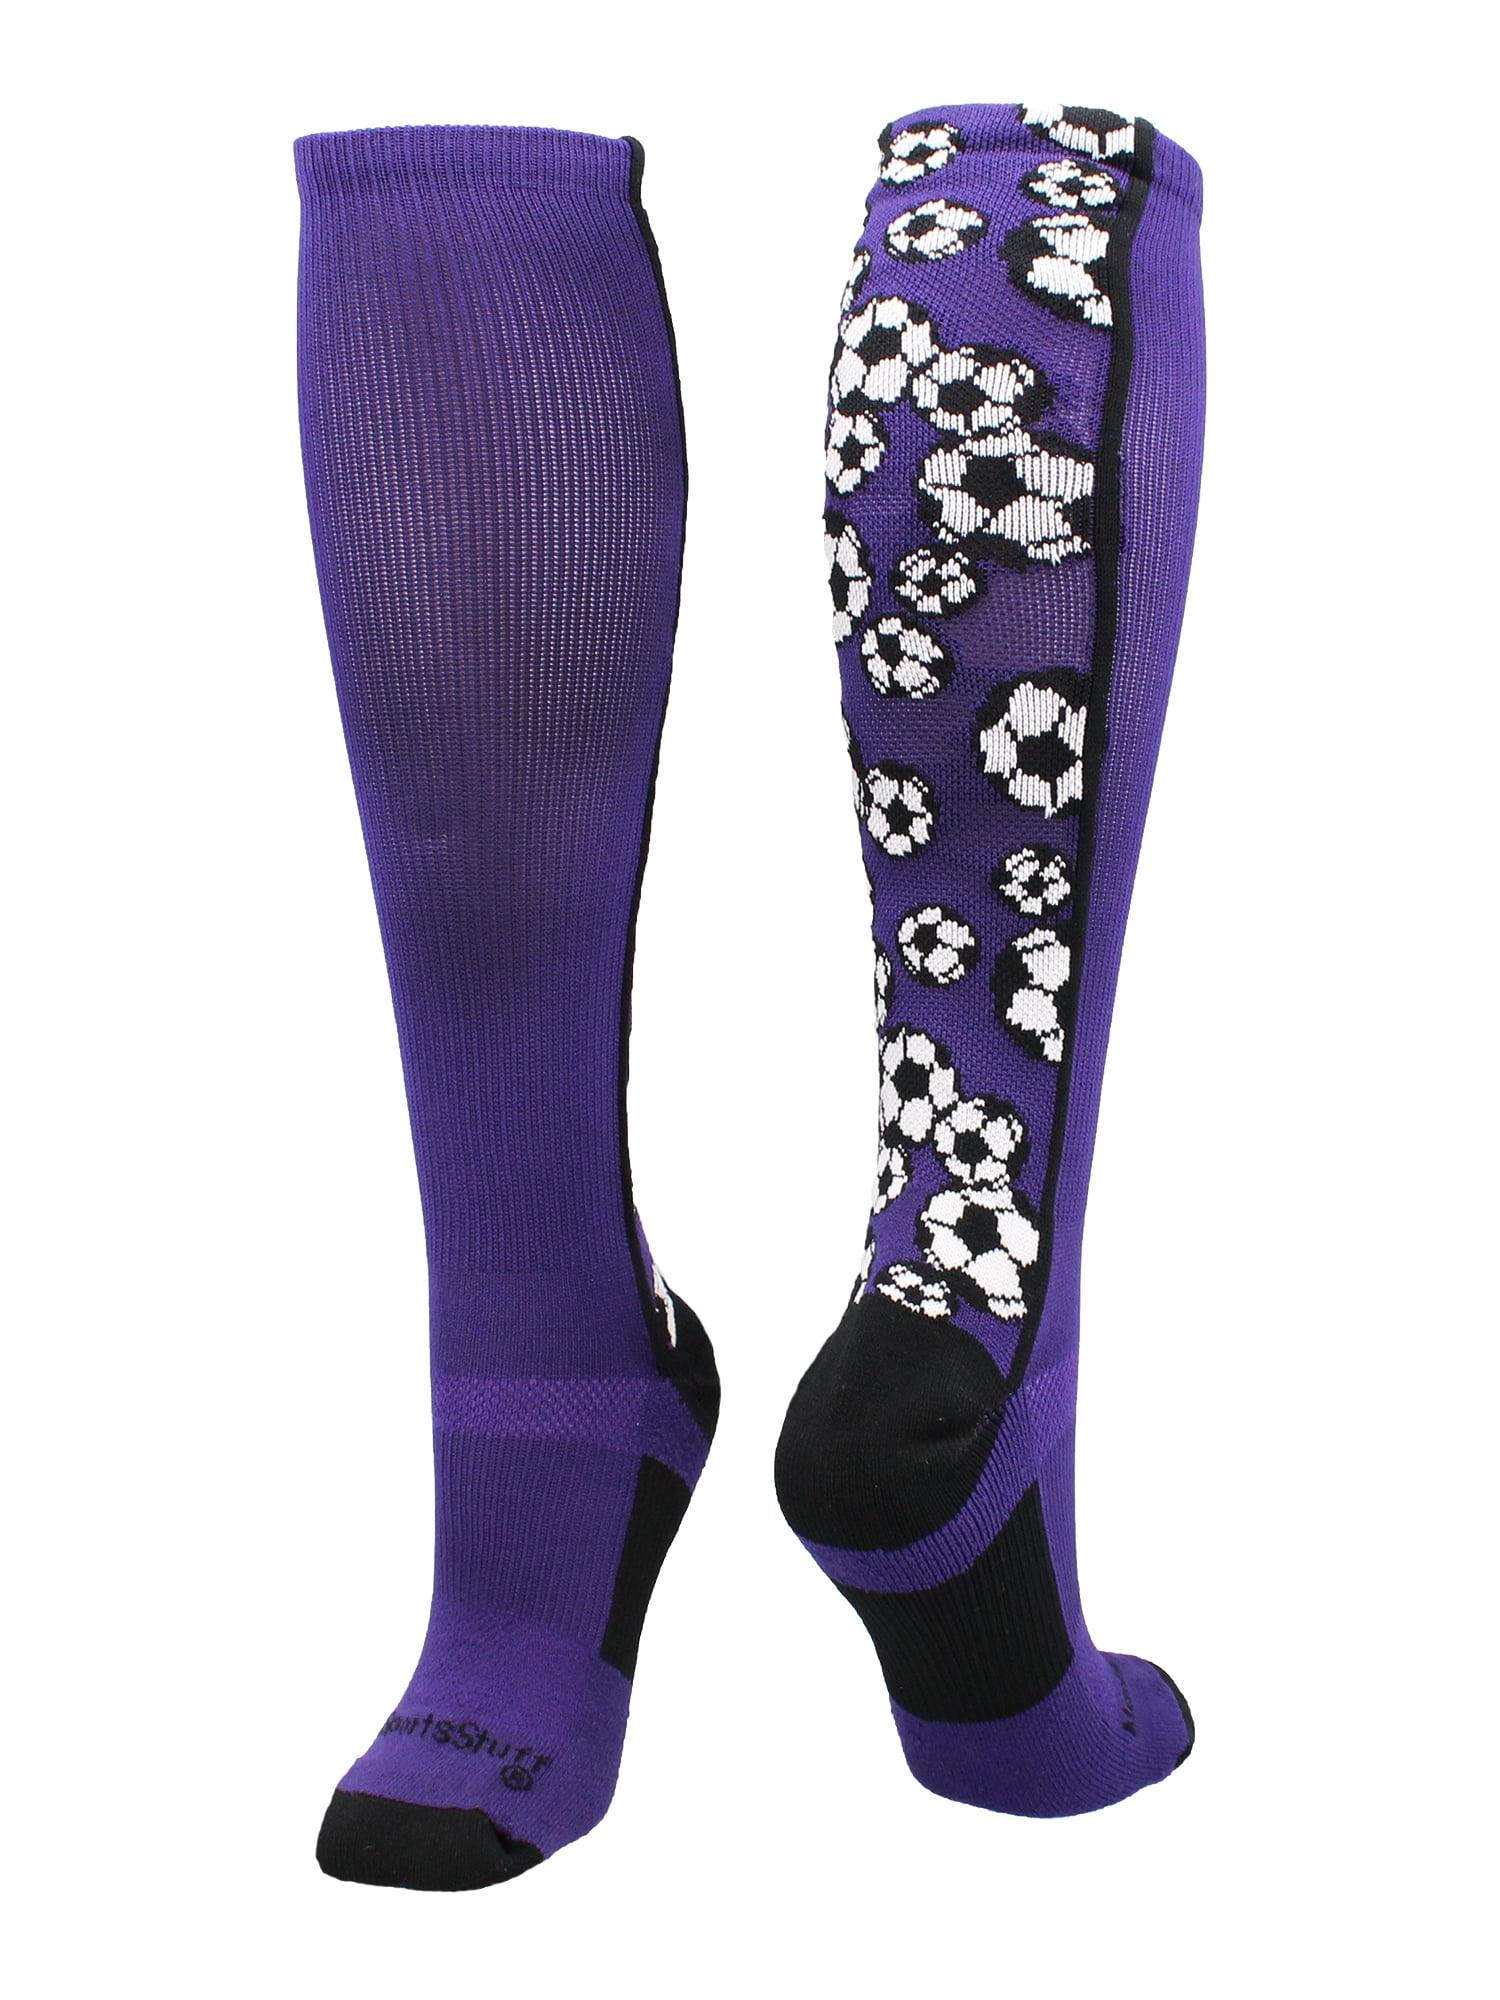 Crazy Soccer Socks with Soccer Balls over the calf (Purple/Black, Small ...